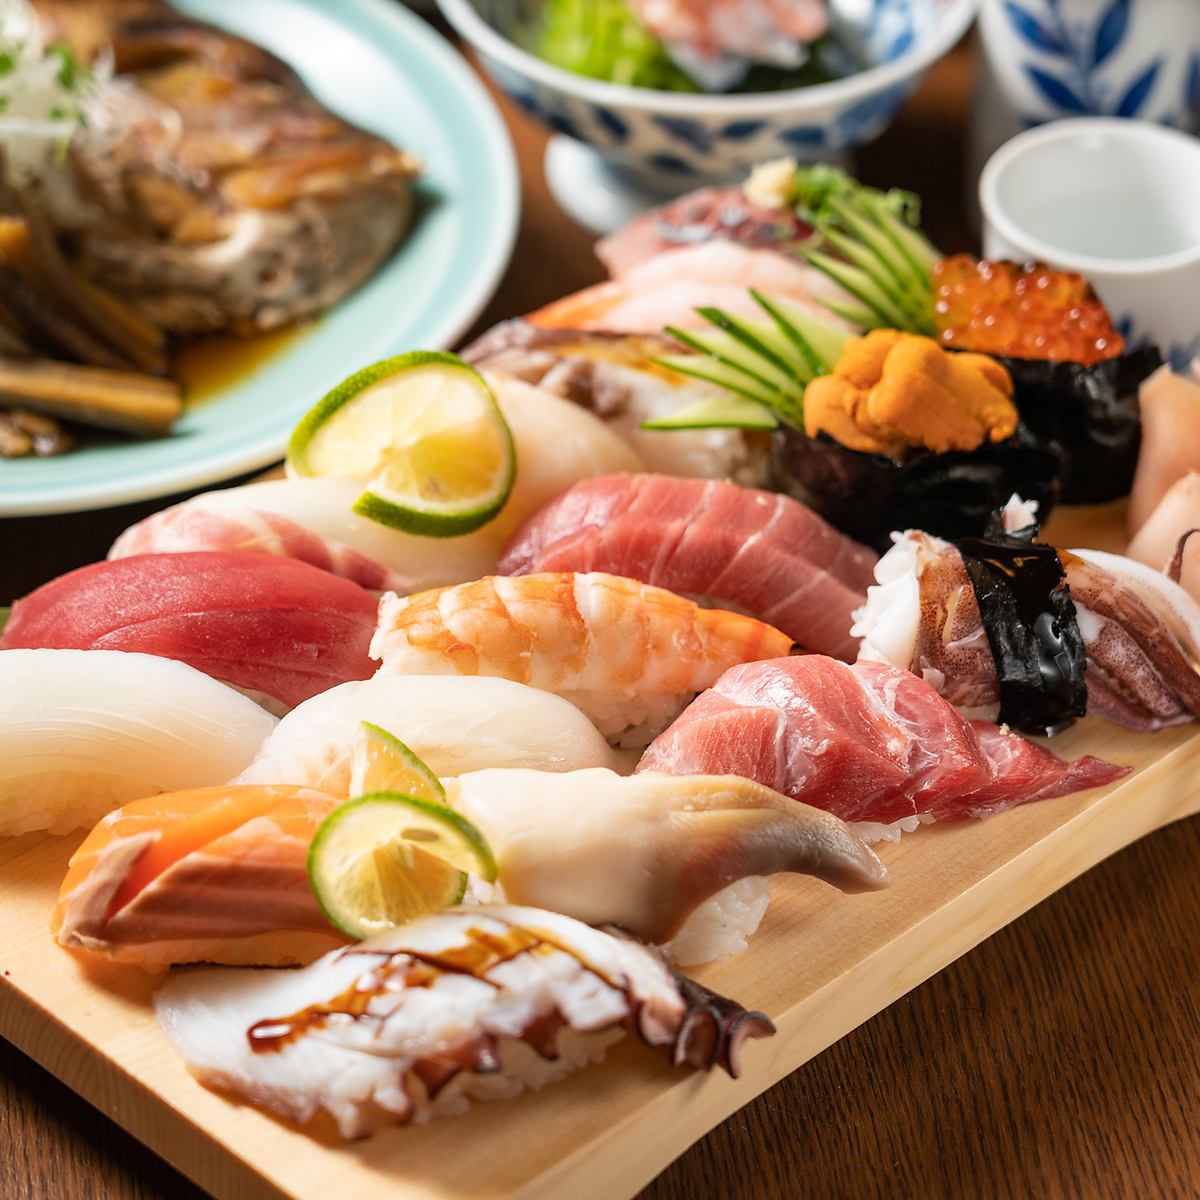 ◆ Enjoy authentic sushi with fresh ingredients at a reasonable price.◆